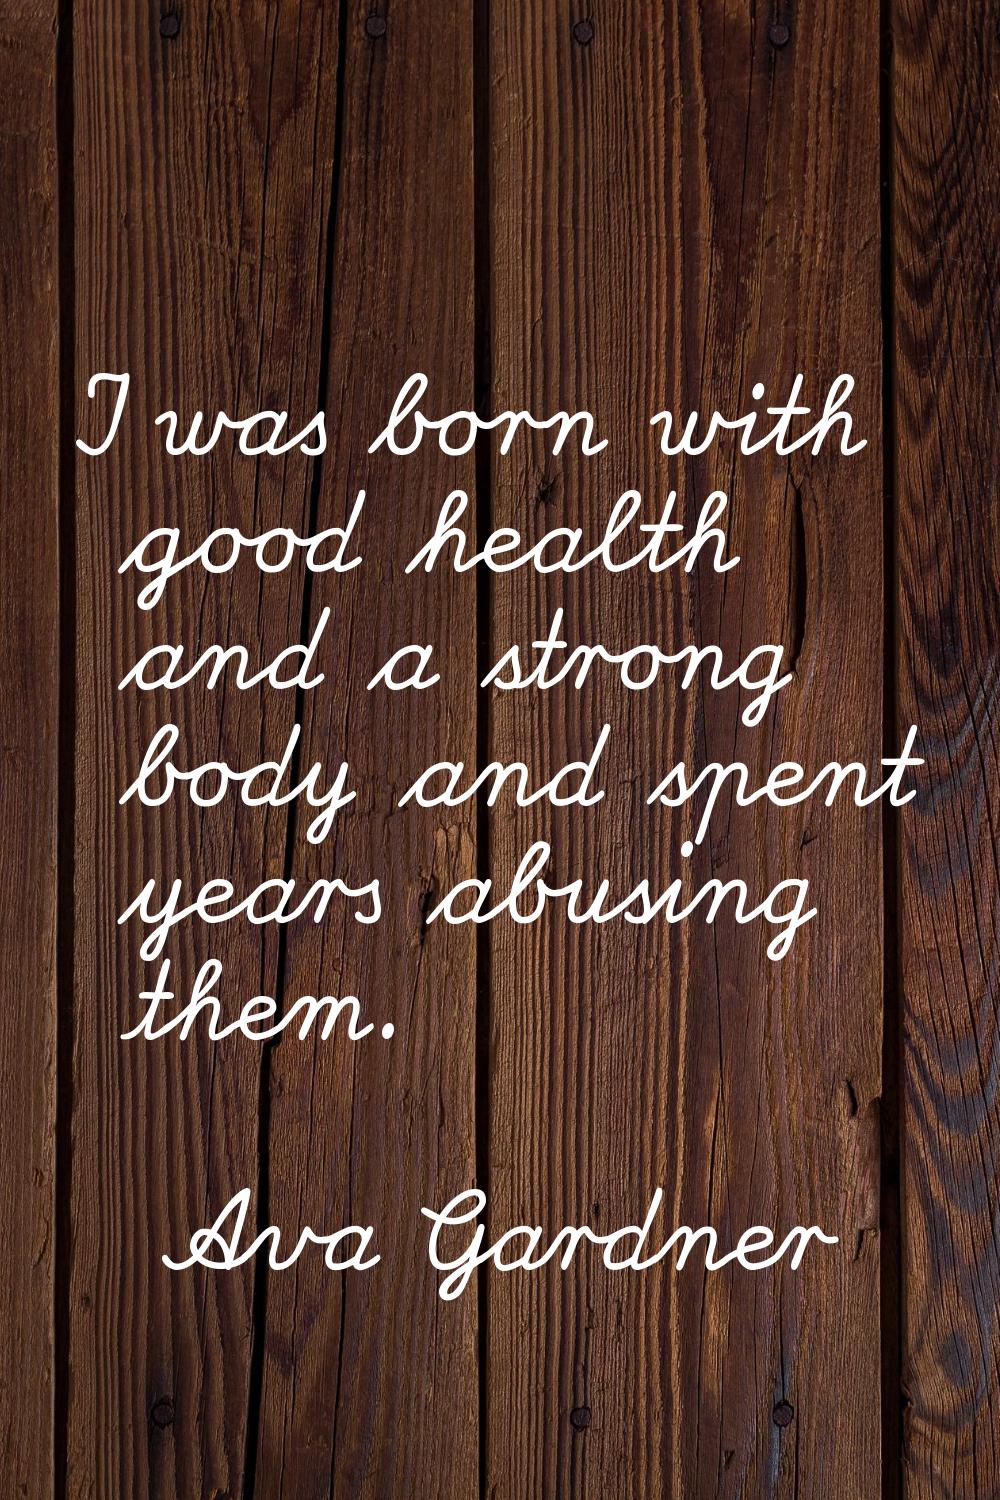 I was born with good health and a strong body and spent years abusing them.